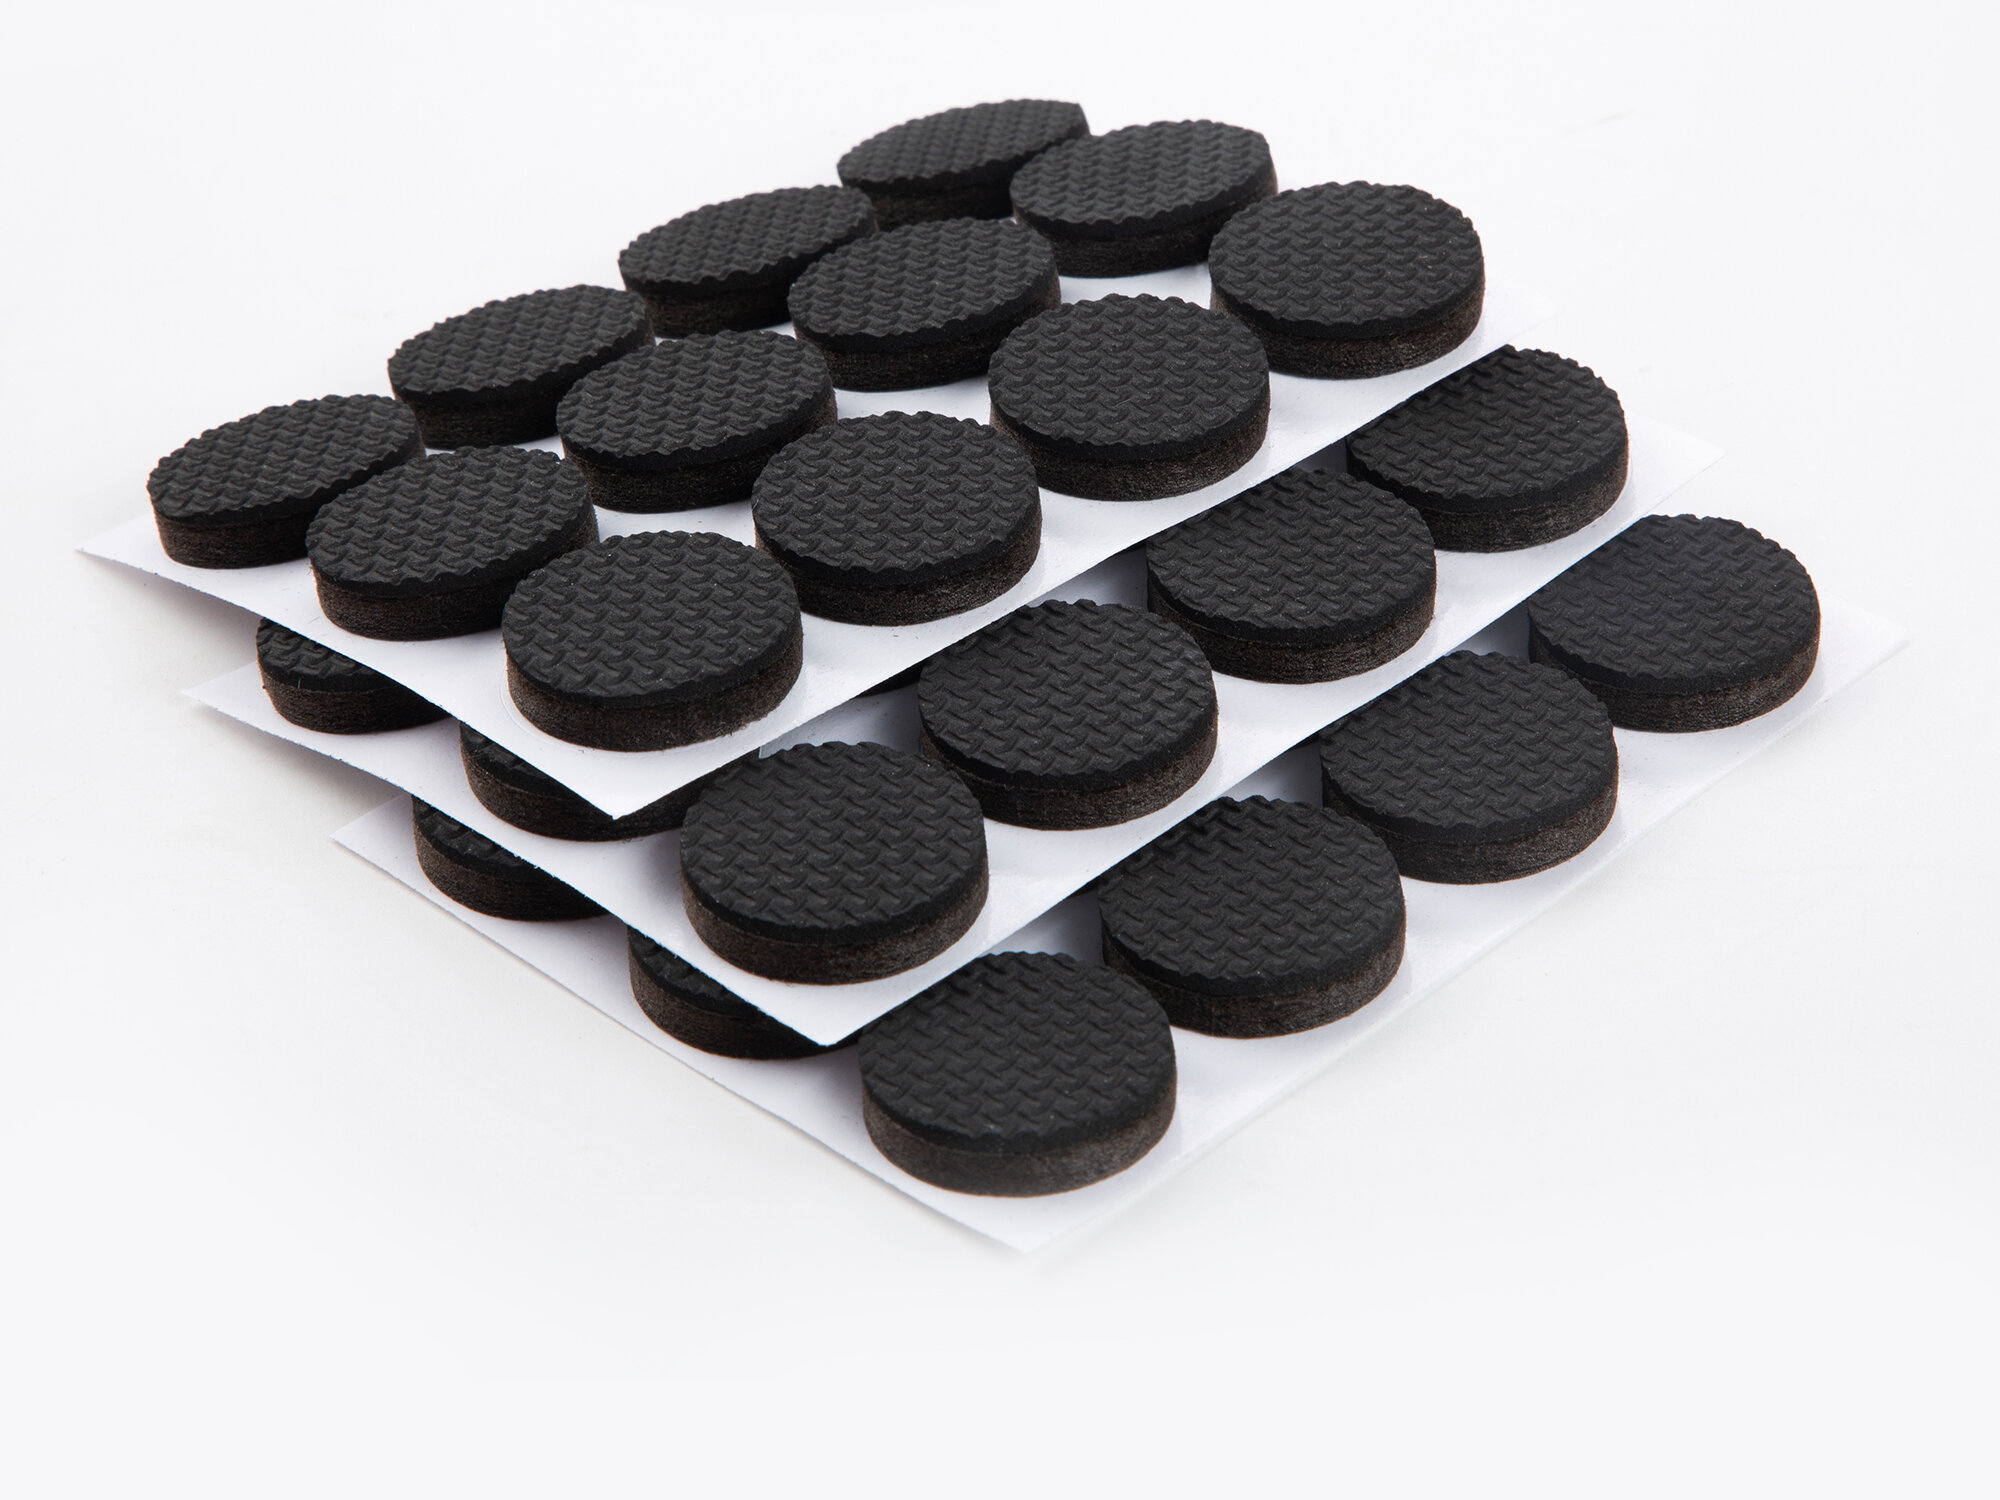 10x Conical Recessed Rubber Feet Bumpers Pads For Furniture Table Chair Dress cb 